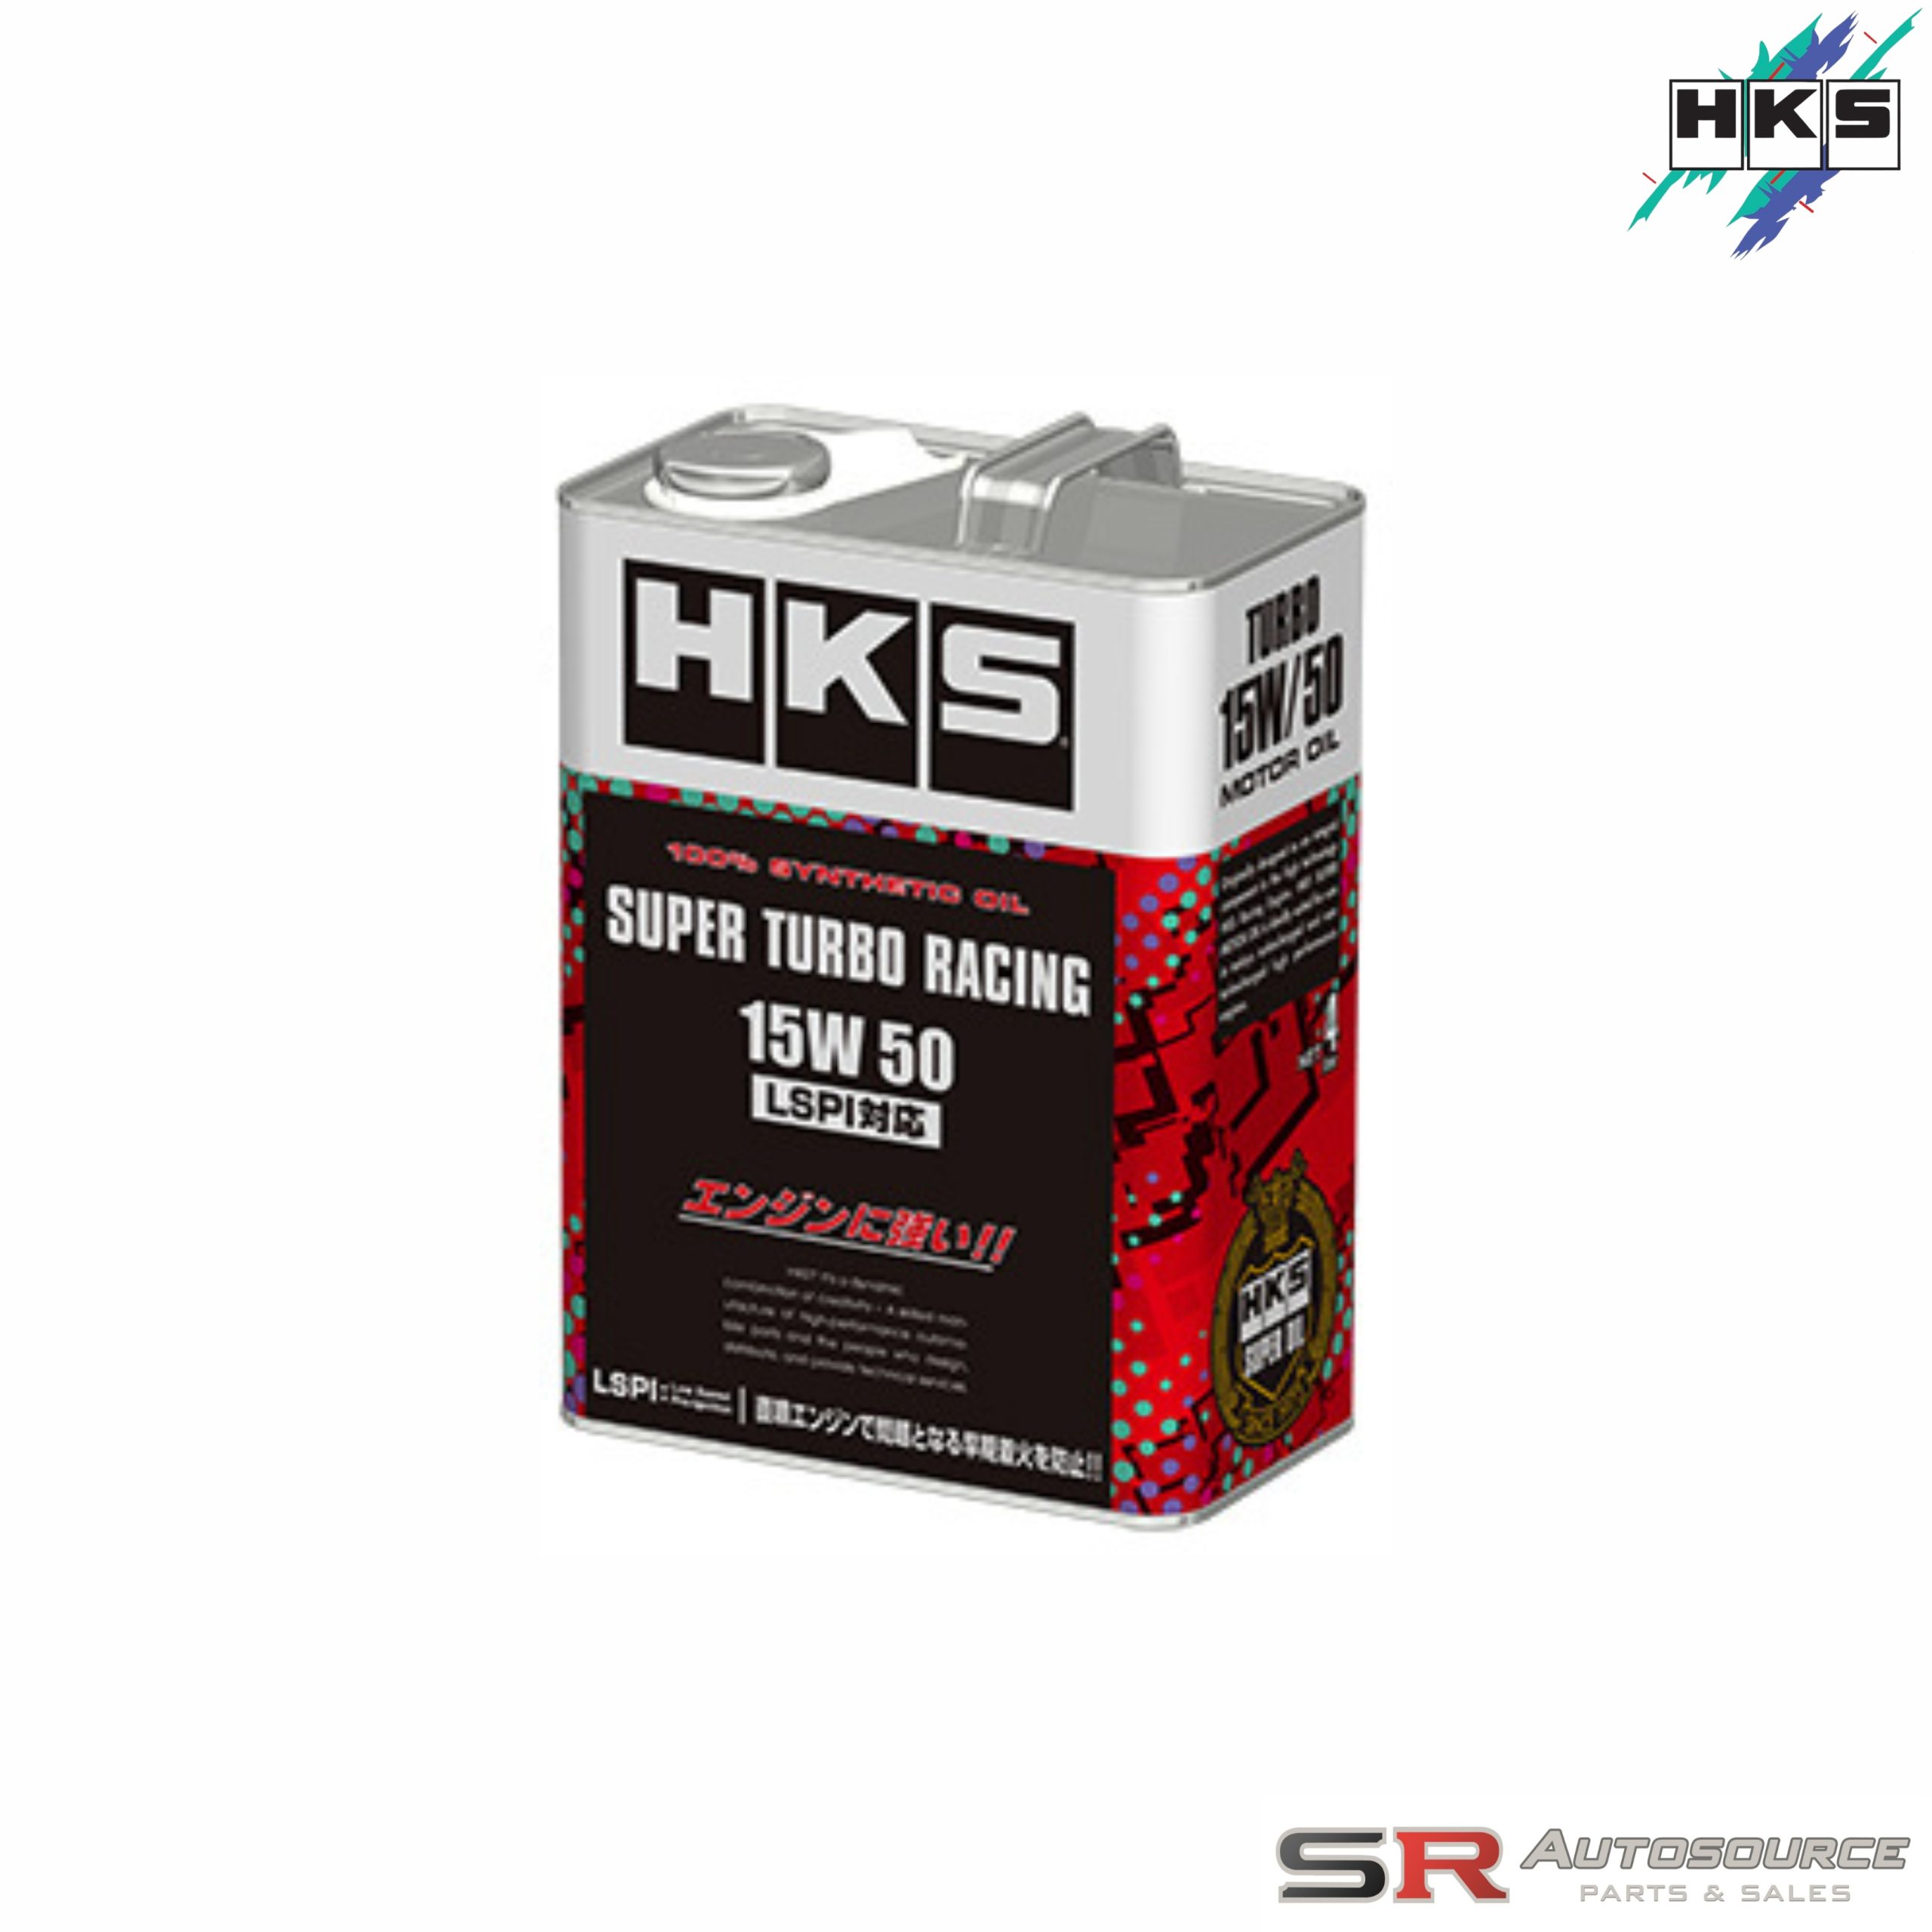 HKS Super Turbo Racing Oil 15W-50 4 Litre Can